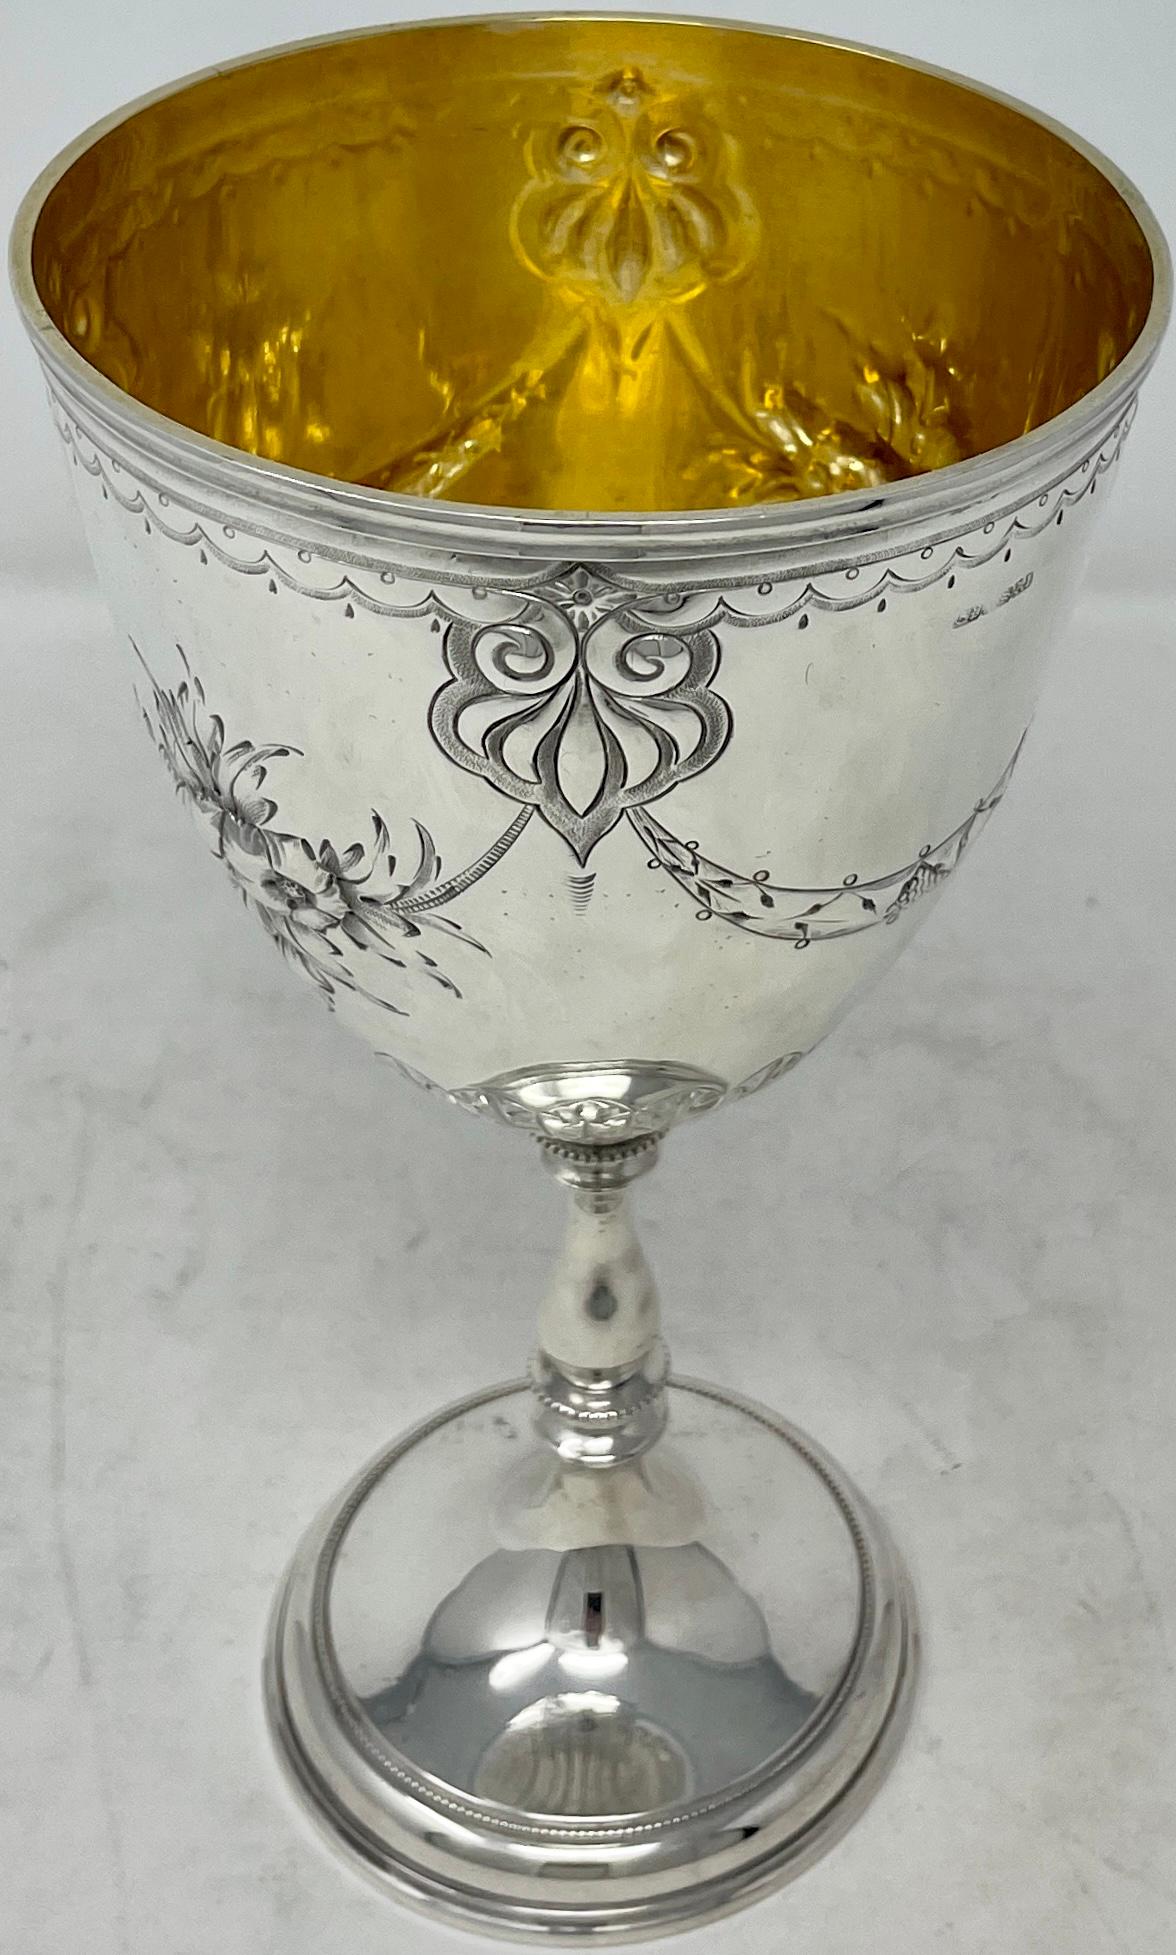 Antique English Victorian Chased Silver-Plated Goblet, Circa 1900.
Heavy Goblet with Beautiful Tracing and a Gold Wash Interior.